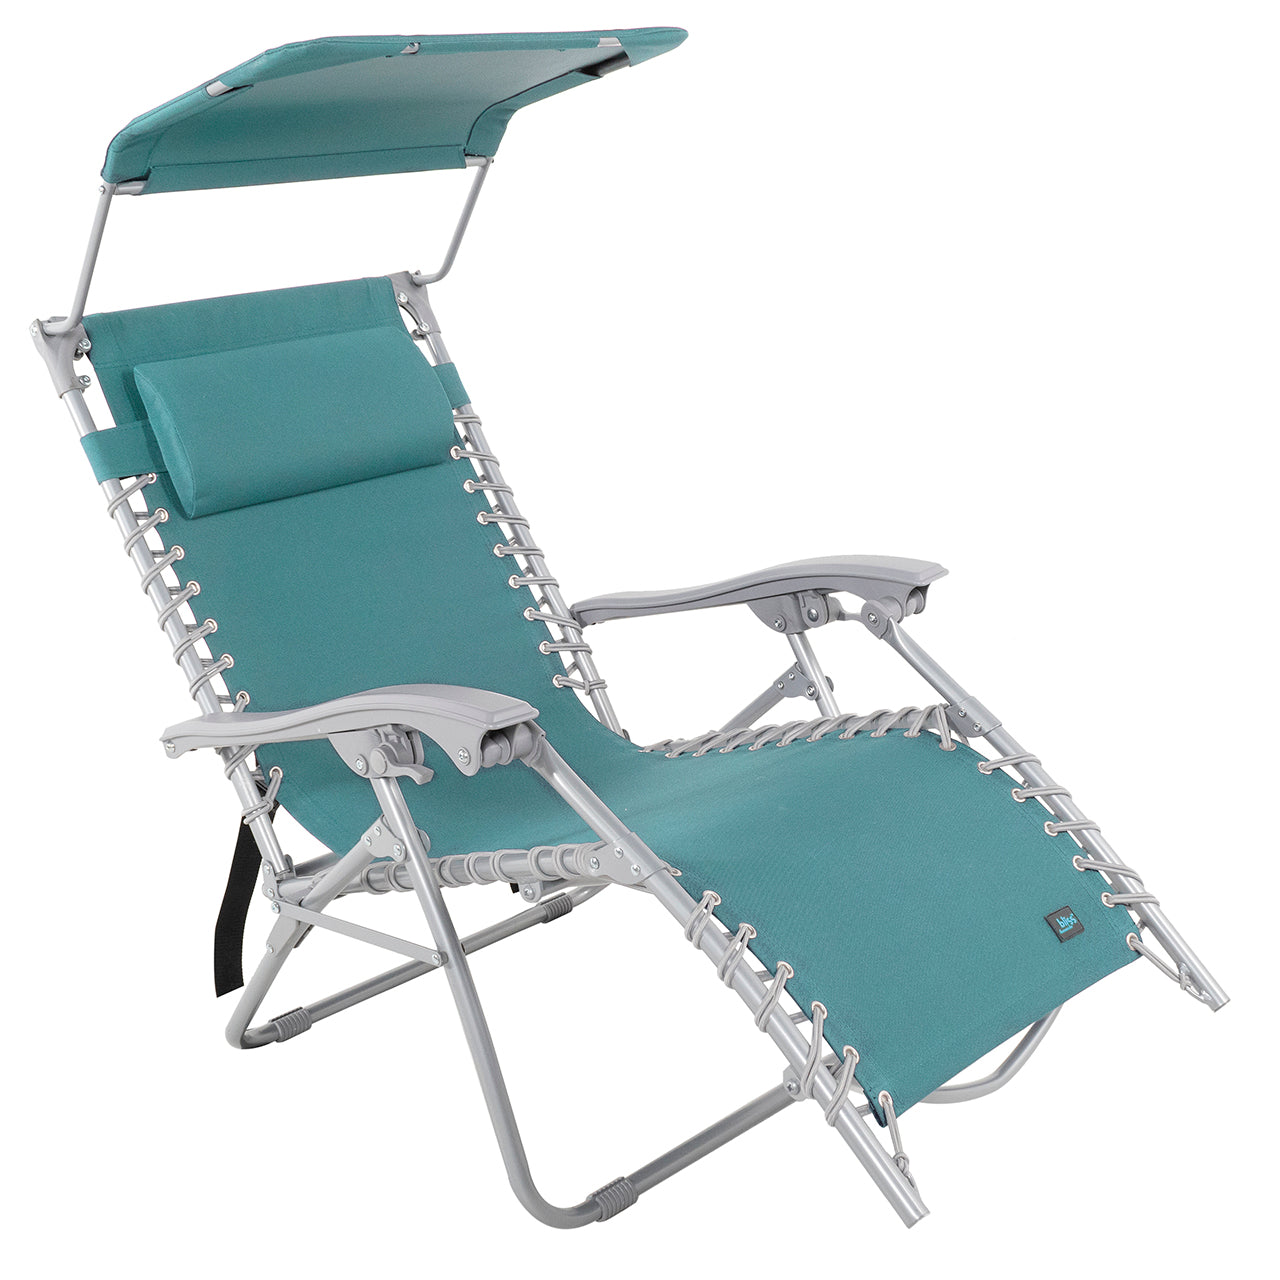 Bliss Hammocks 26-inch Gravity Free Beach Chair with Pillow and Canopy in the sea glass variation.